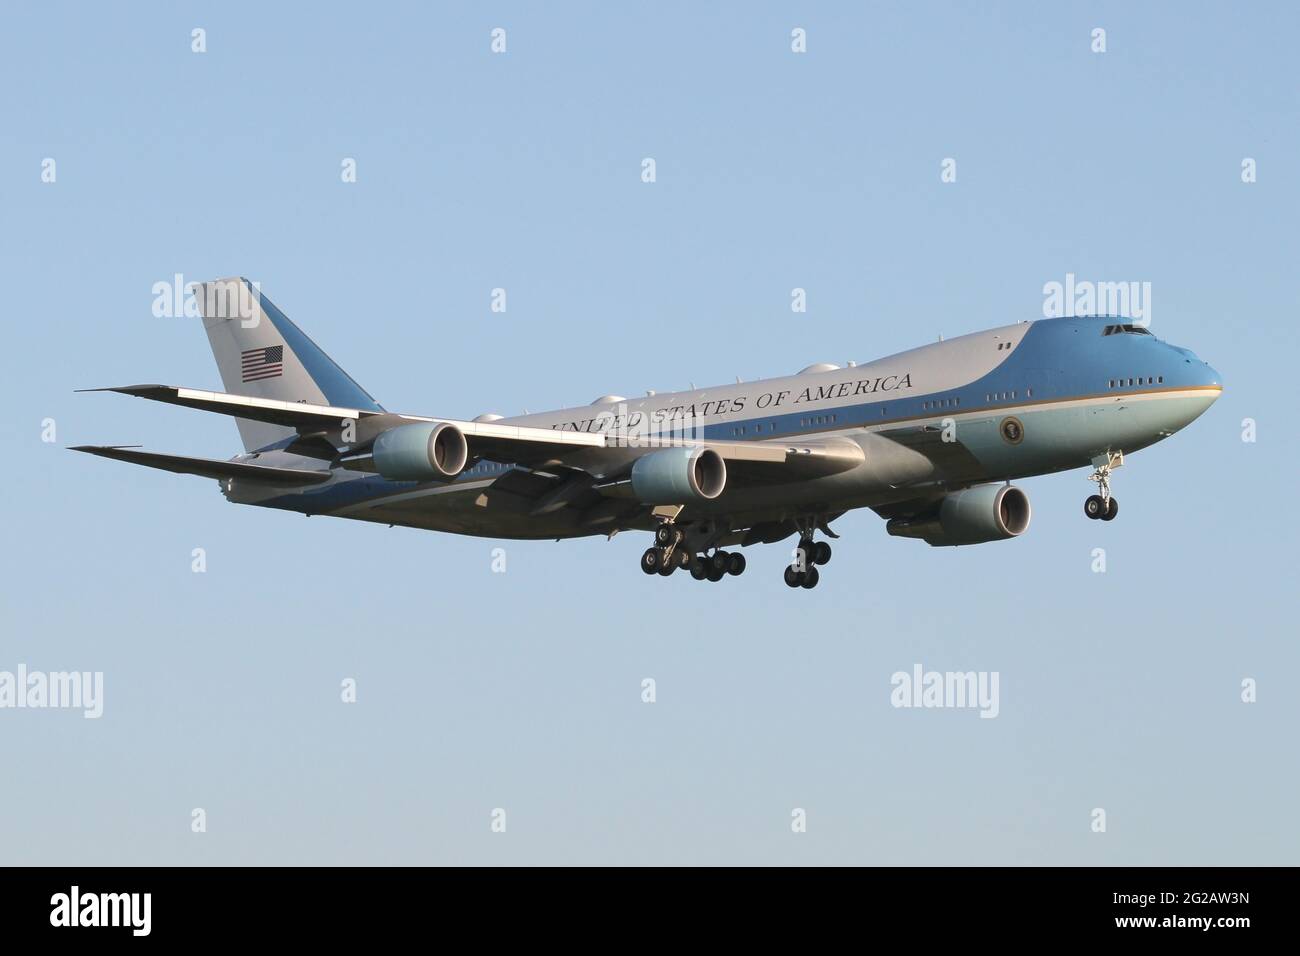 USAF VC-25A 82-8000, callsign Air Force One landing at RAF Mildenhall in Suffolk with President Joe Biden onboard for the g7 in the UK. Stock Photo